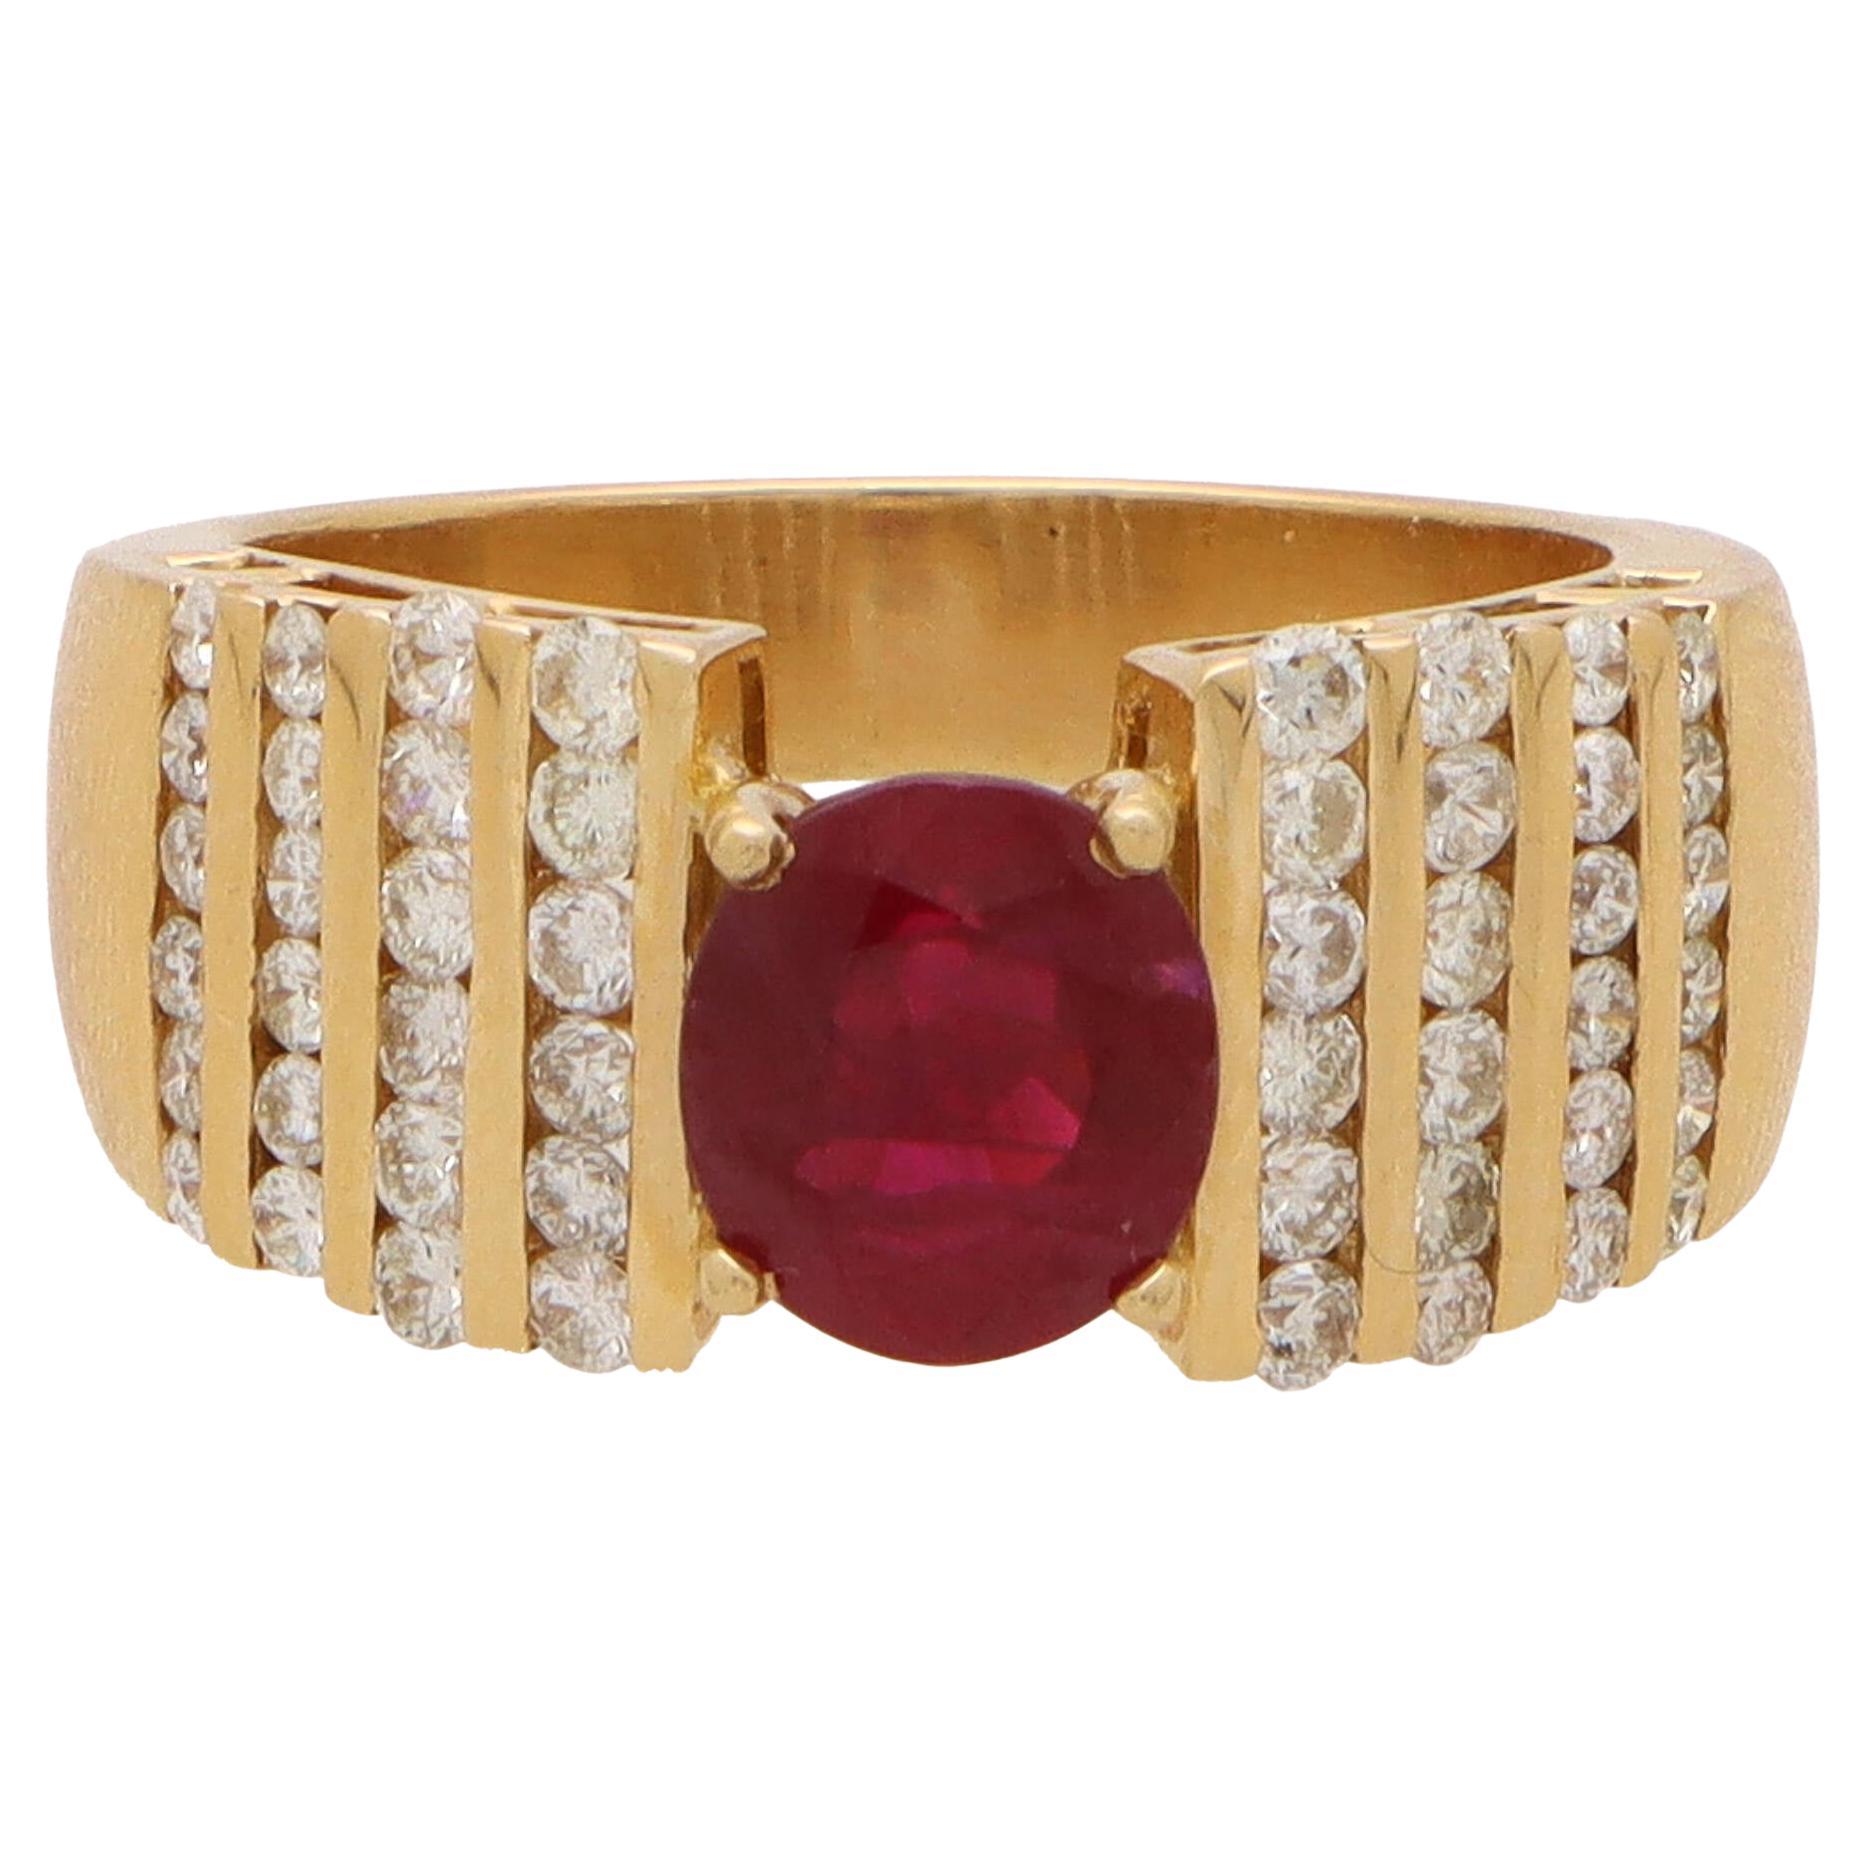 Vintage Ruby and Diamond Dress Ring in 18k Yellow Gold